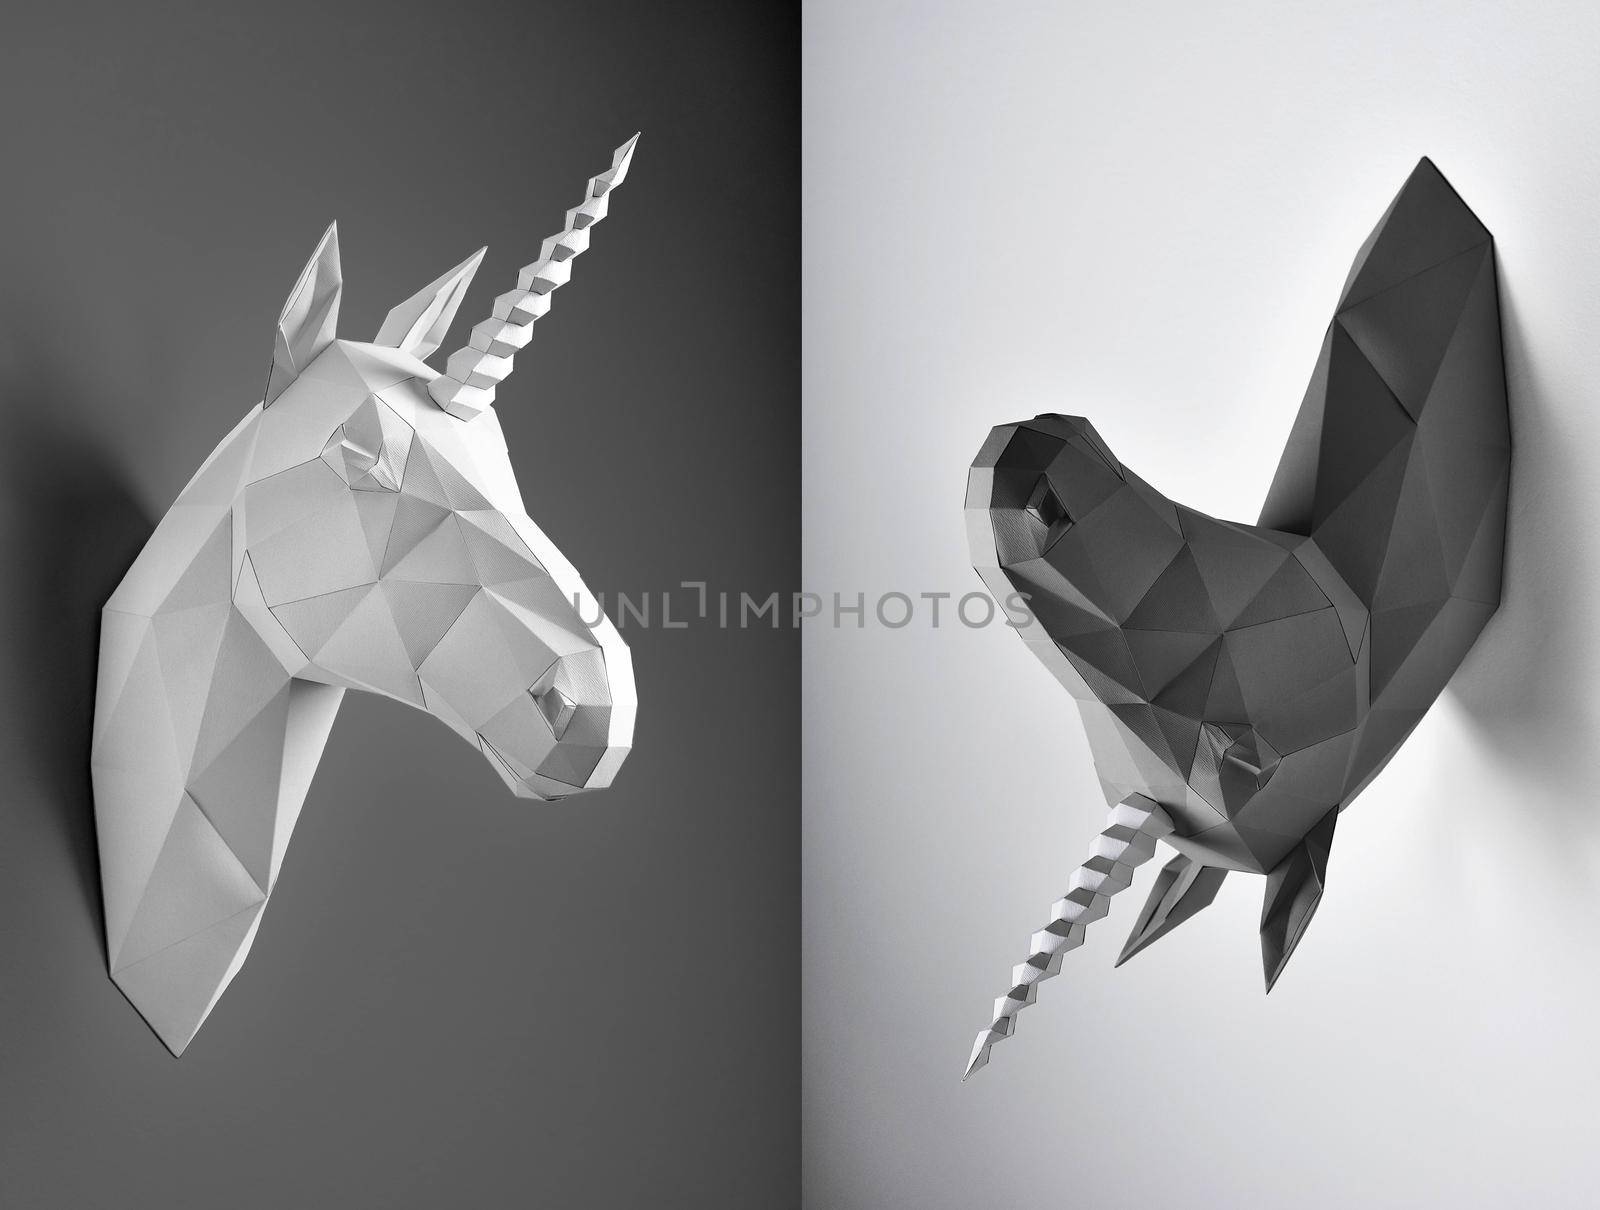 Contrast weird wto parts collage of black and white unicorn heads. Horses have similiar geometrical lines and shape with angles. Unicorns hang on white and black background.